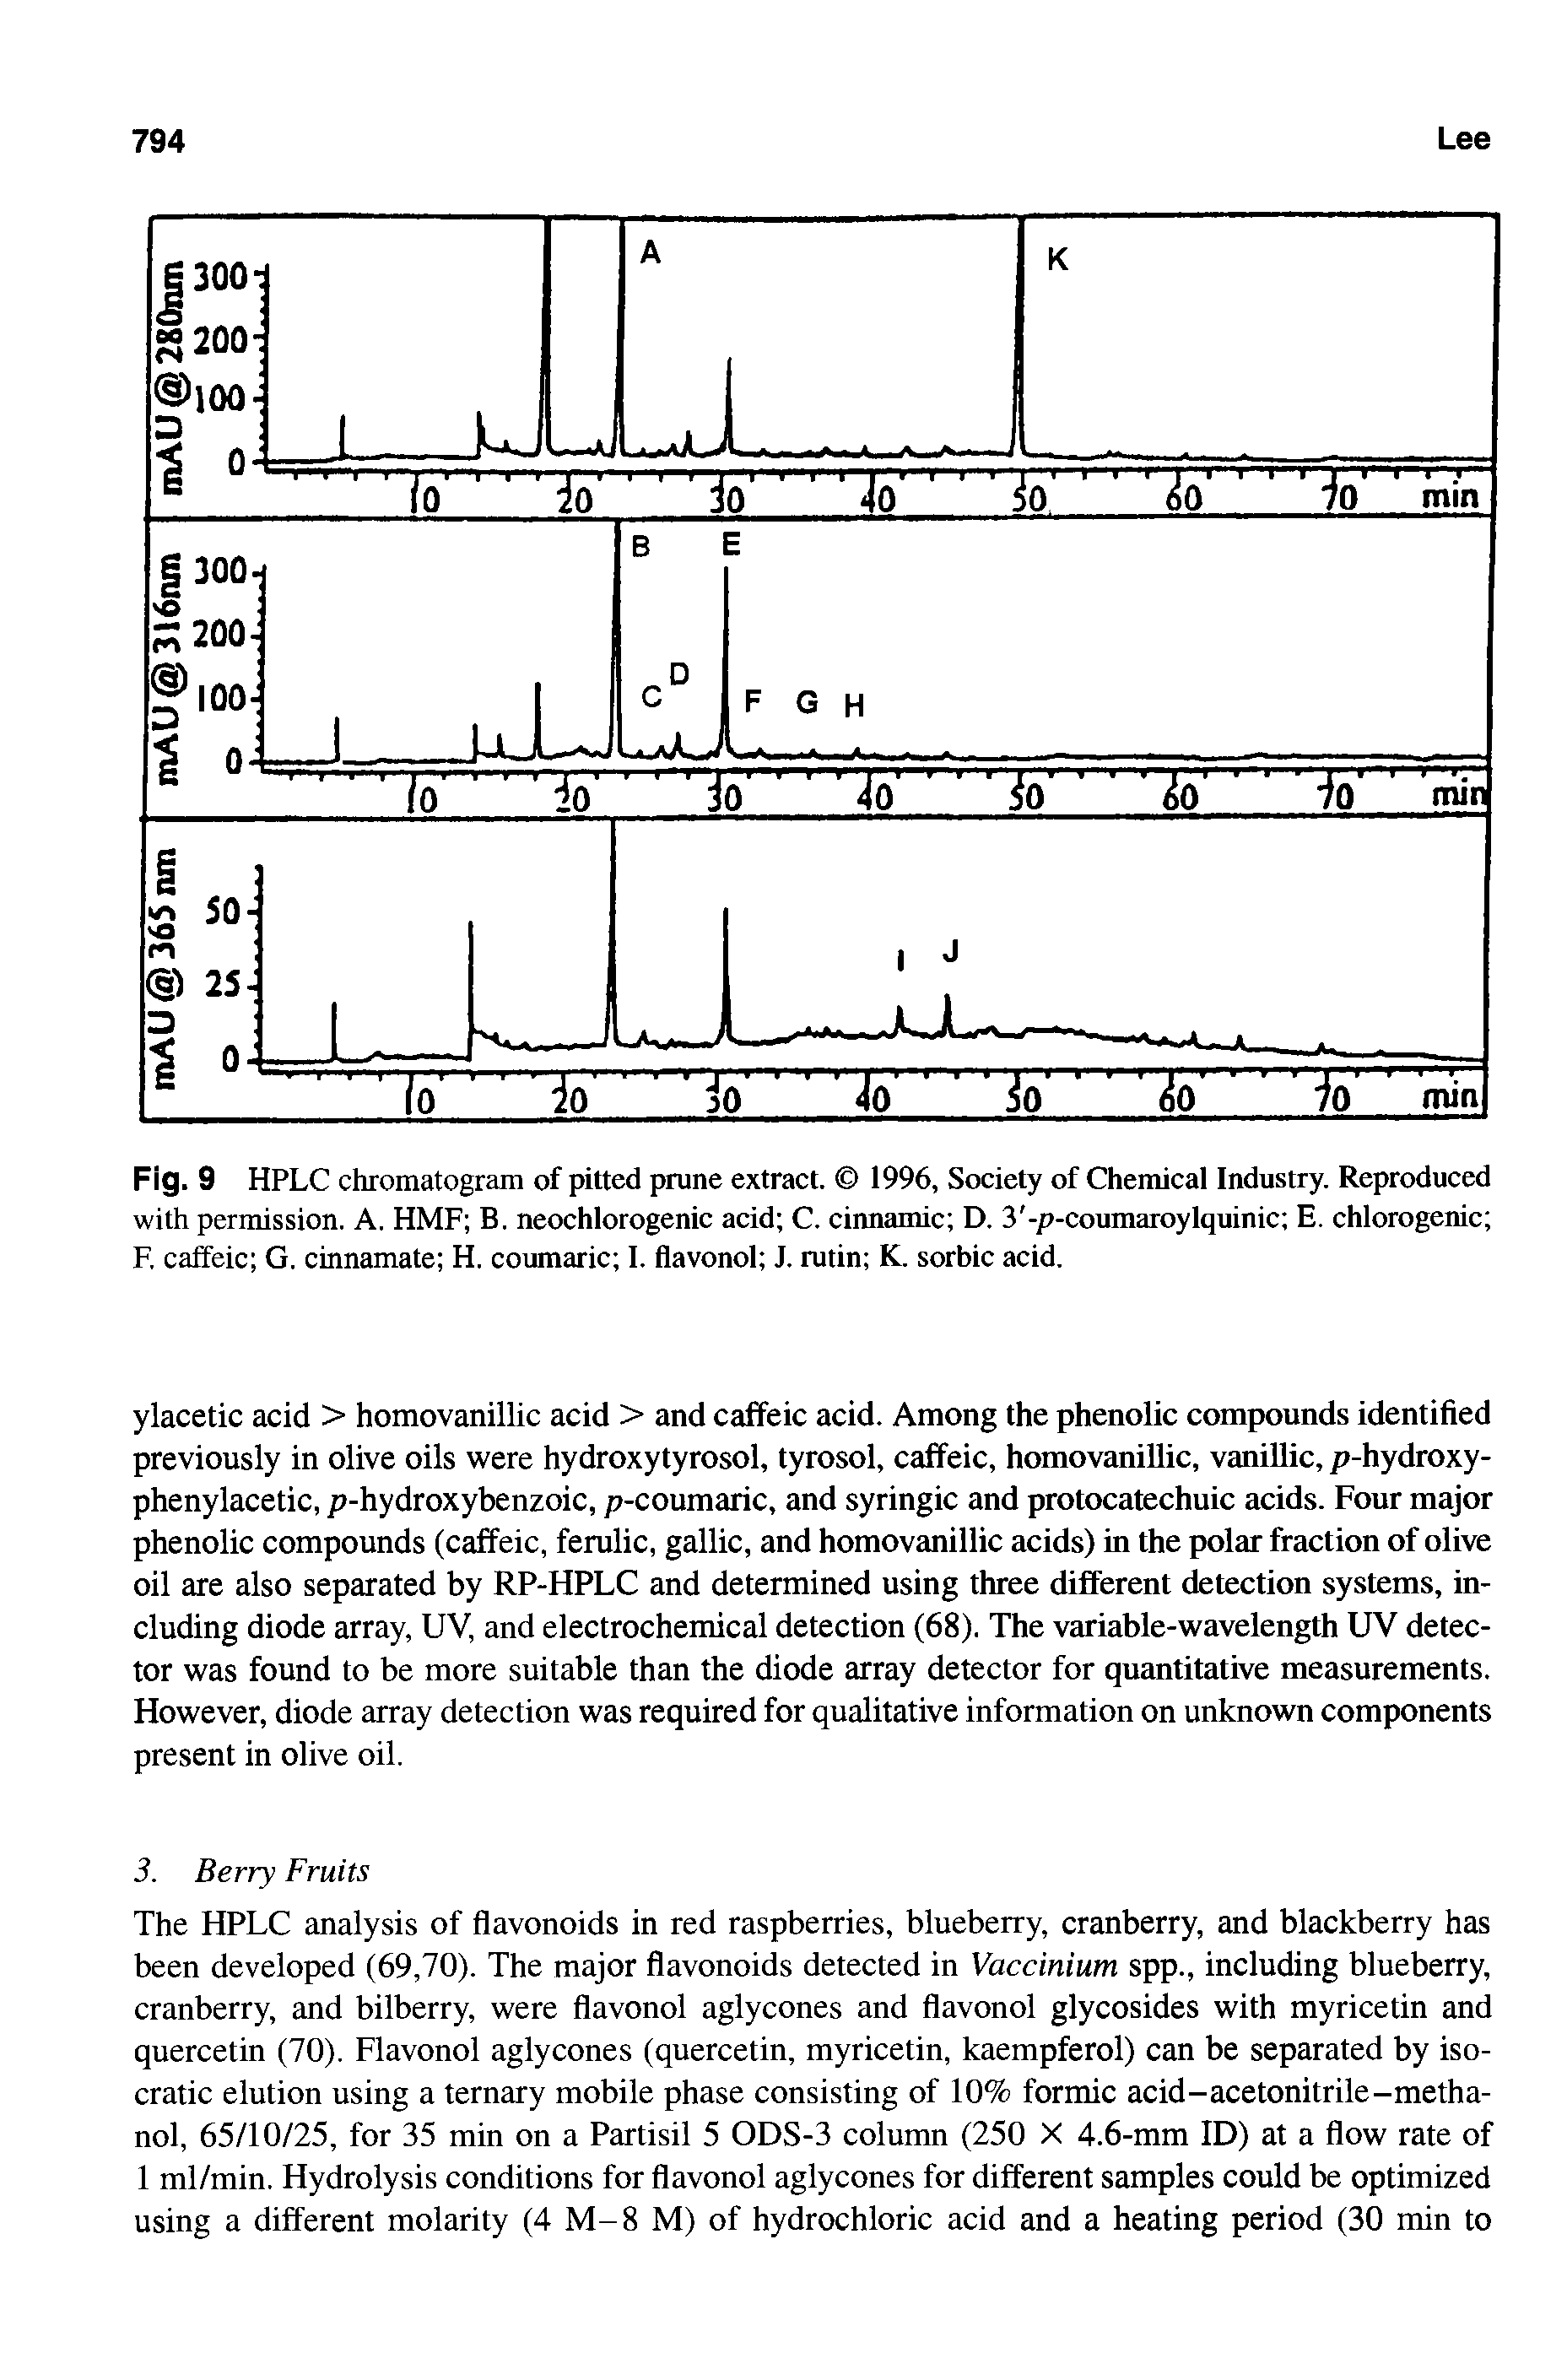 Fig. 9 HPLC chromatogram of pitted prune extract. 1996, Society of Chemical Industry. Reproduced with permission. A. HMF B. neochlorogenic acid C. cinnamic D. 3 -p-coumaroylquinic E. chlorogenic F. caffeic G. cinnamate H. coumaric I. flavonol J. rutin K. sorbic acid.